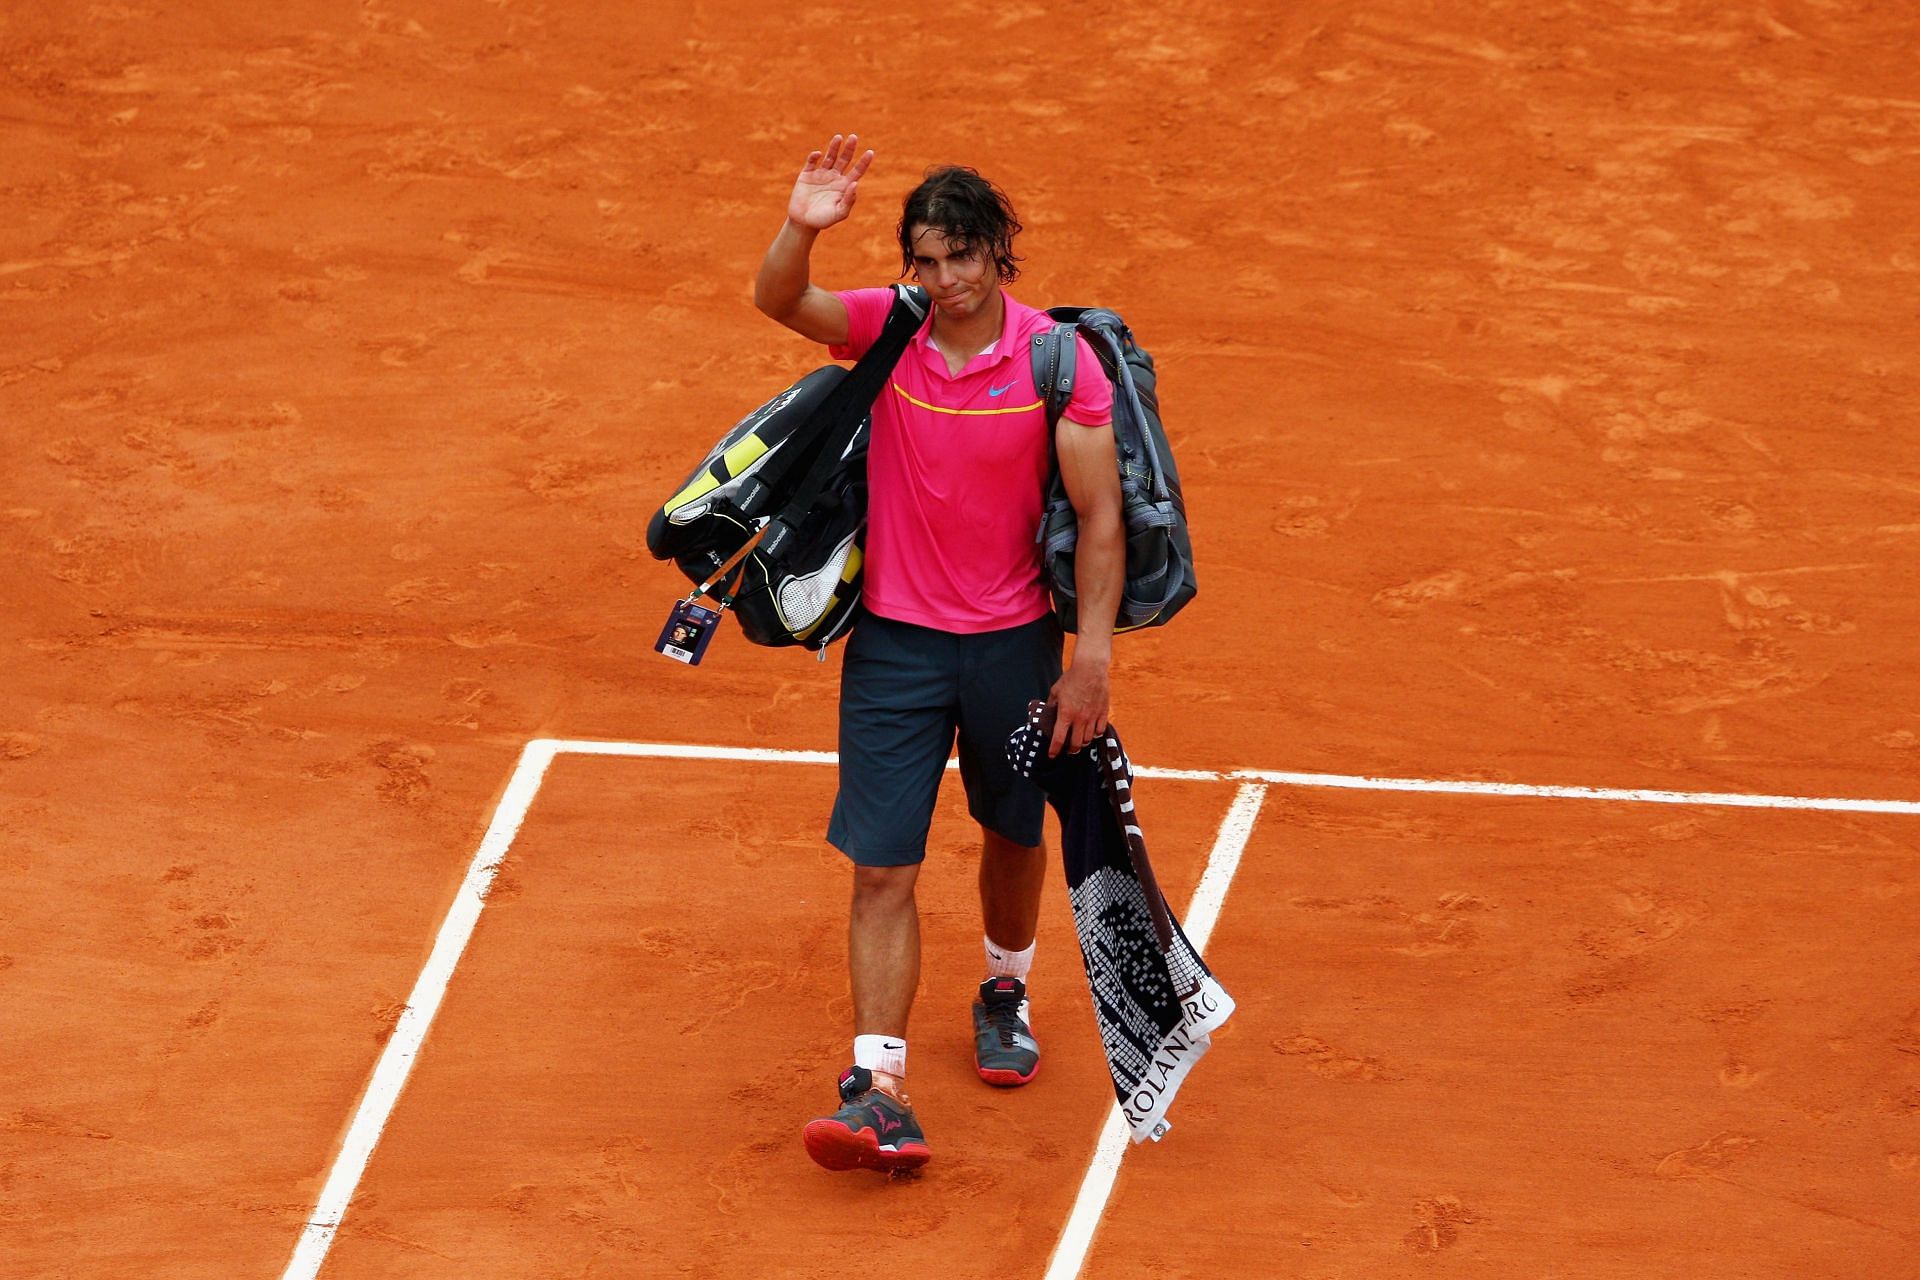 Rafael Nadal waves to the crowd after losing to Robin Soderling at the 2009 French Open.